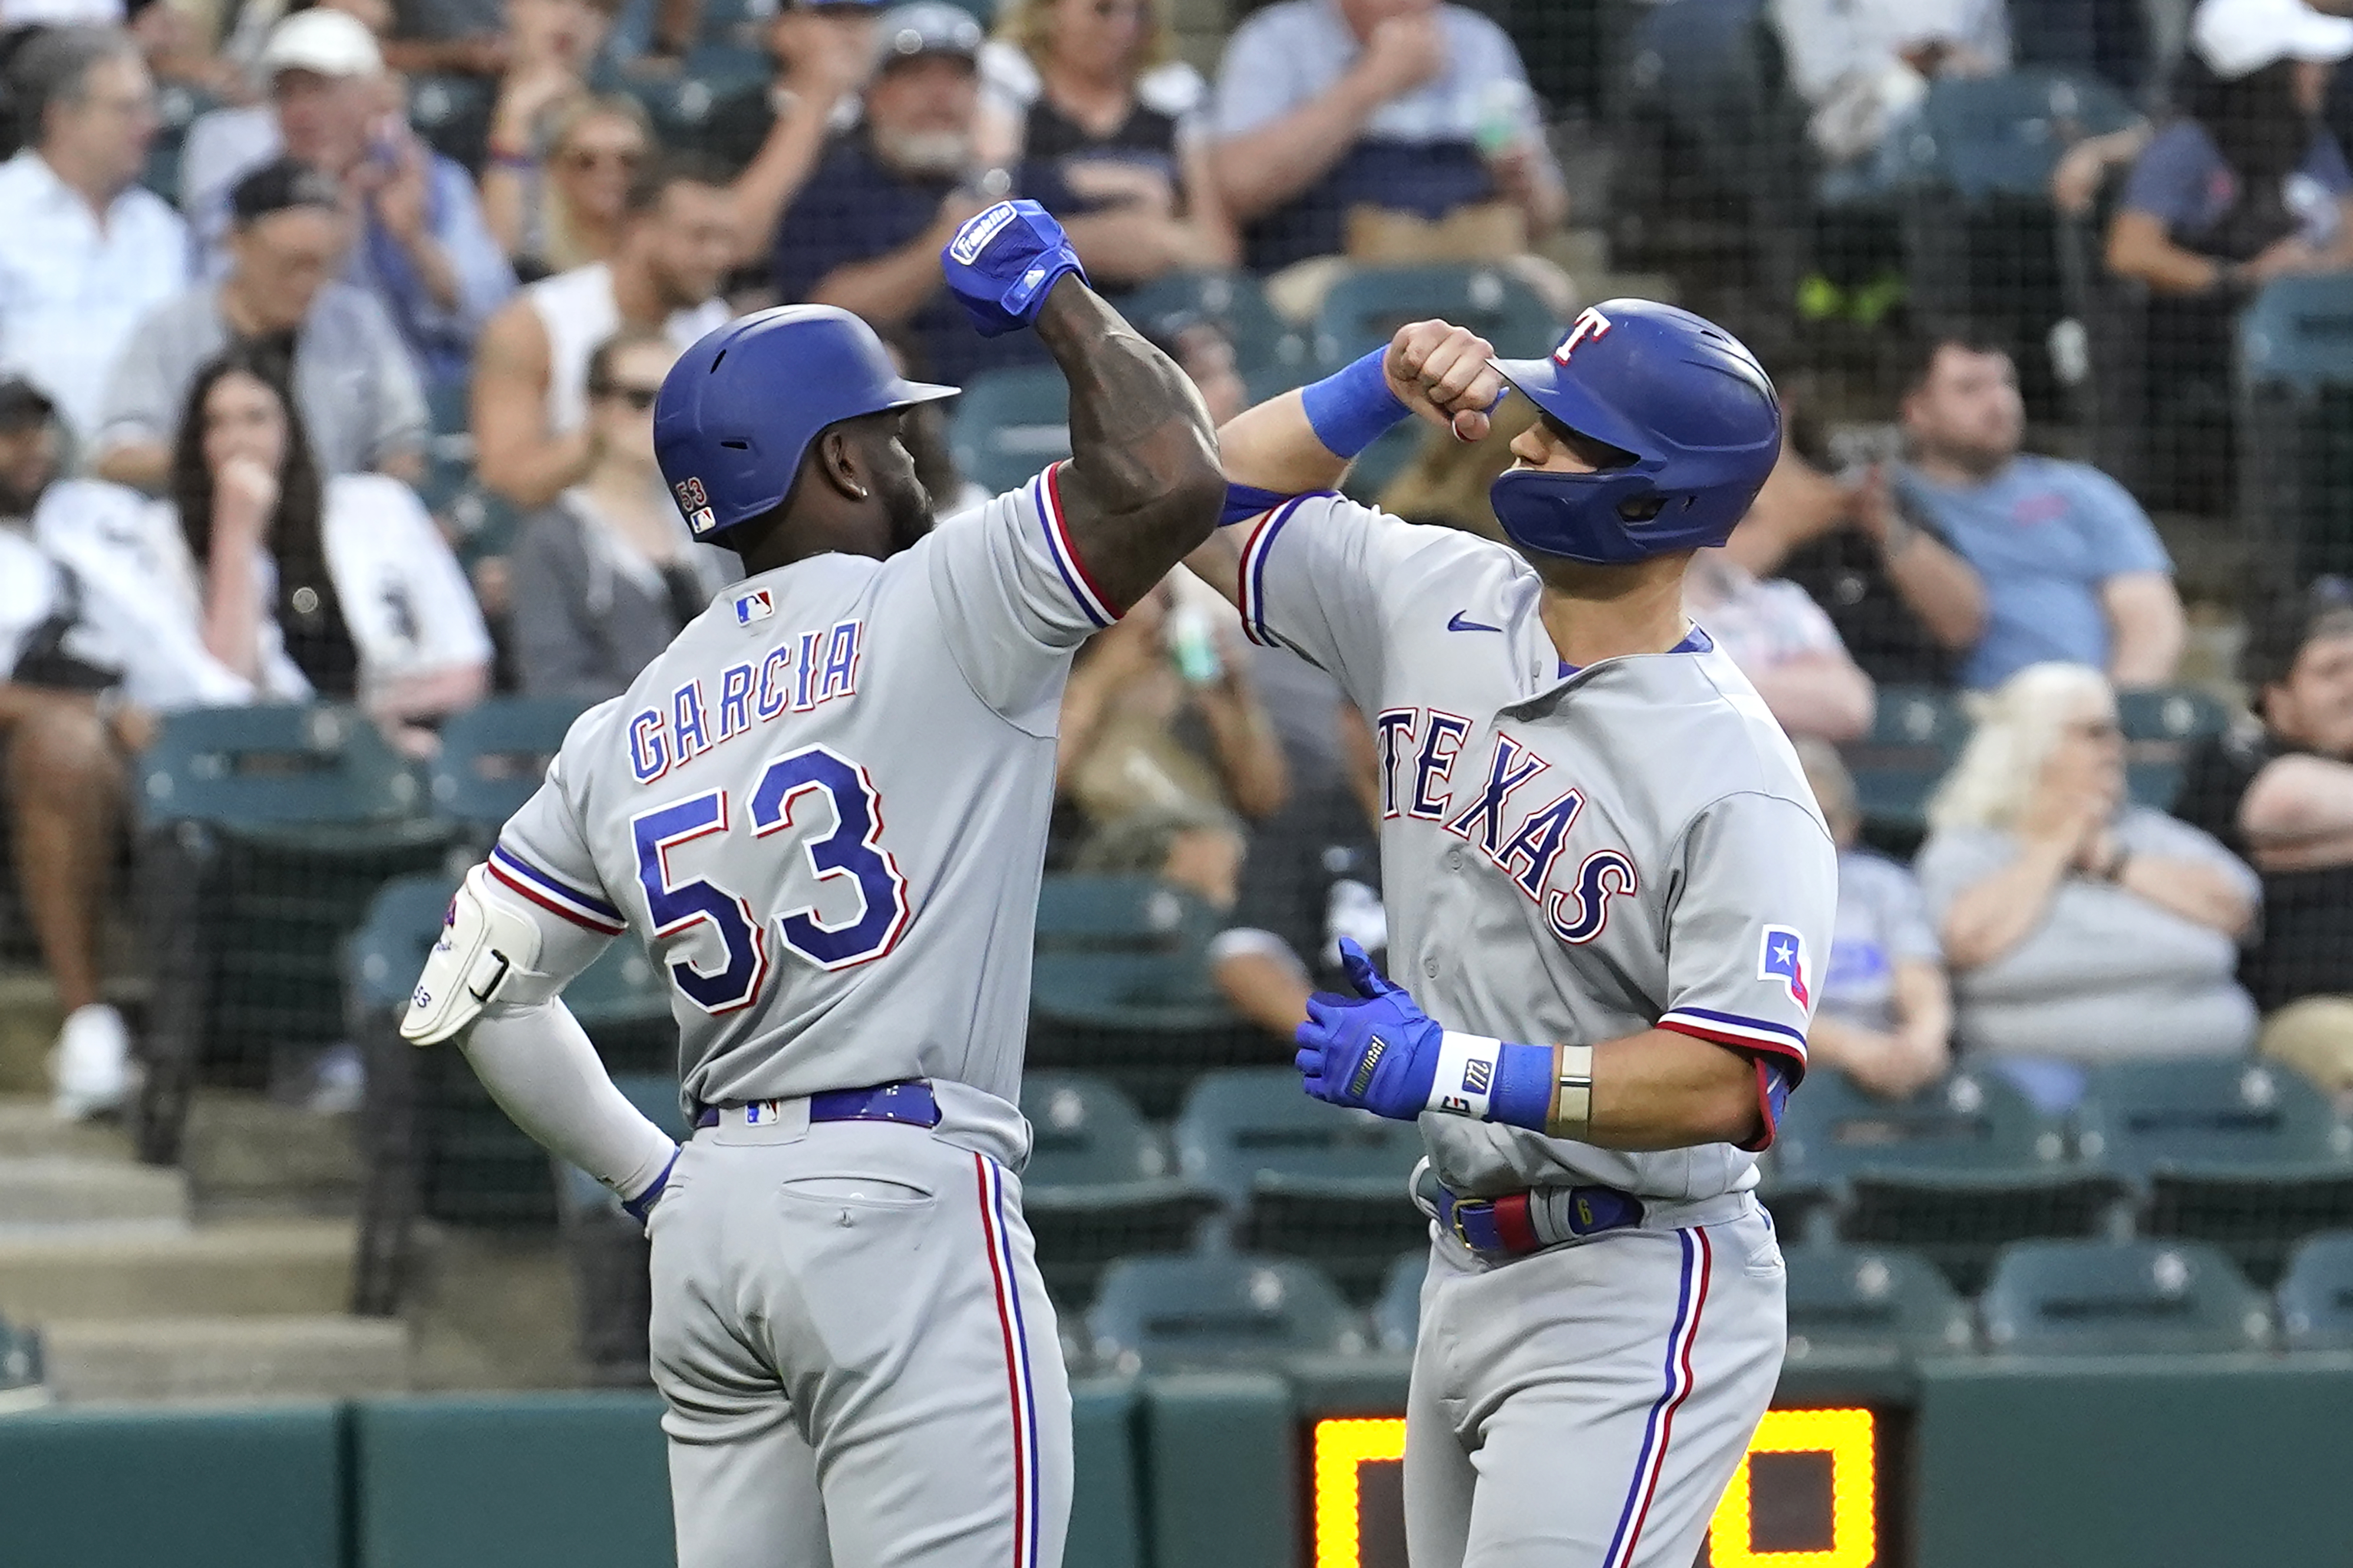 Mad Max returns for Rangers after month away with chance to put them up 3-0  over Astros in ALCS